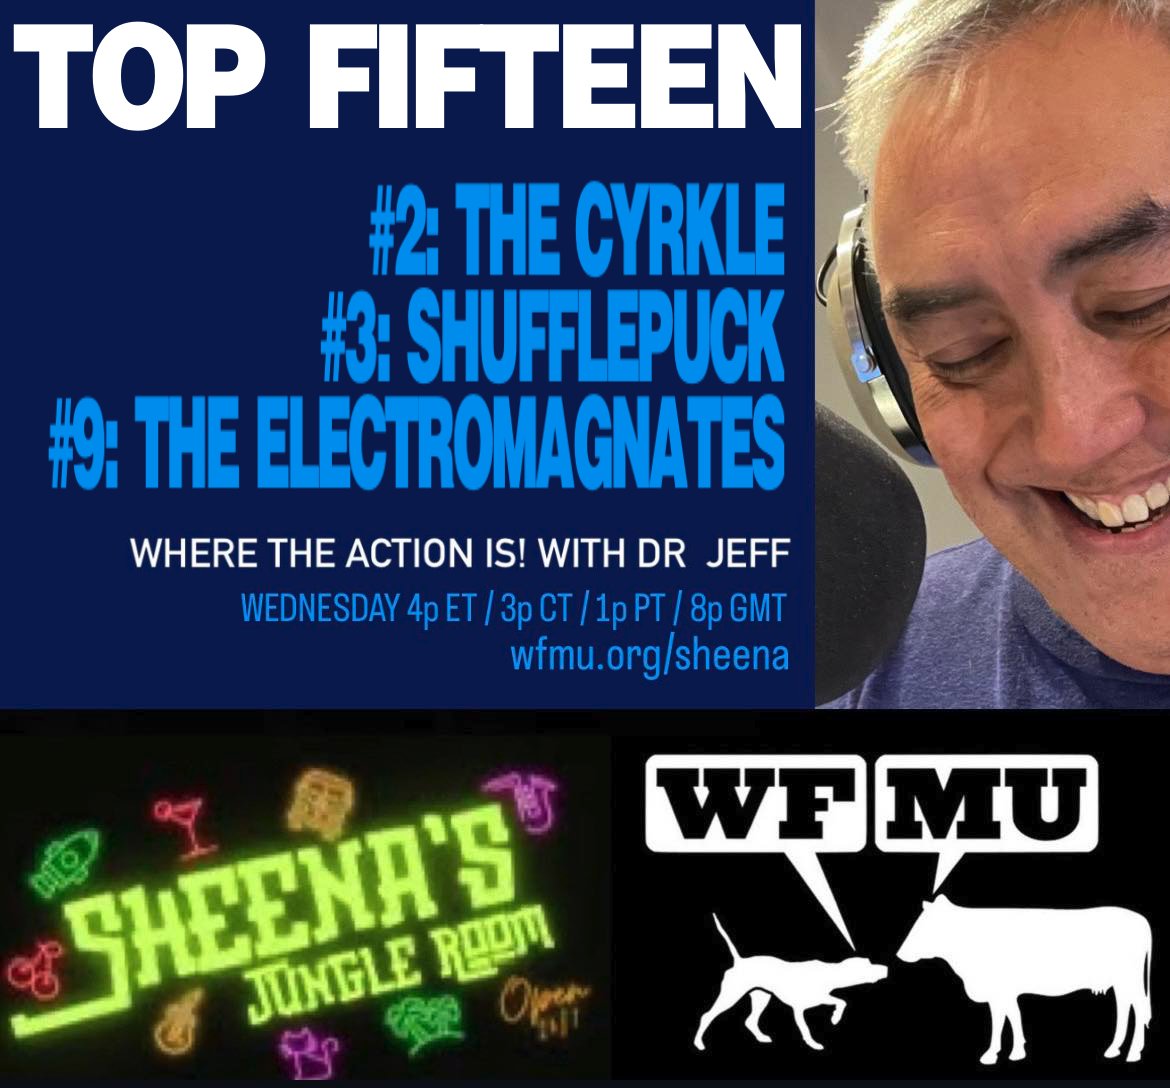 WFMU's Where The Action Is! with spins and chart showings for The Cyrkle, Shufflepuck (from 'Generation Blue') and The Electromagnates, all with music at bigstirrecords.com! Hear the Action:
wfmu.org/playlists/WH
#WFMU #WhereTheActionIs #IndieRock #GeekRock #SunshinePop